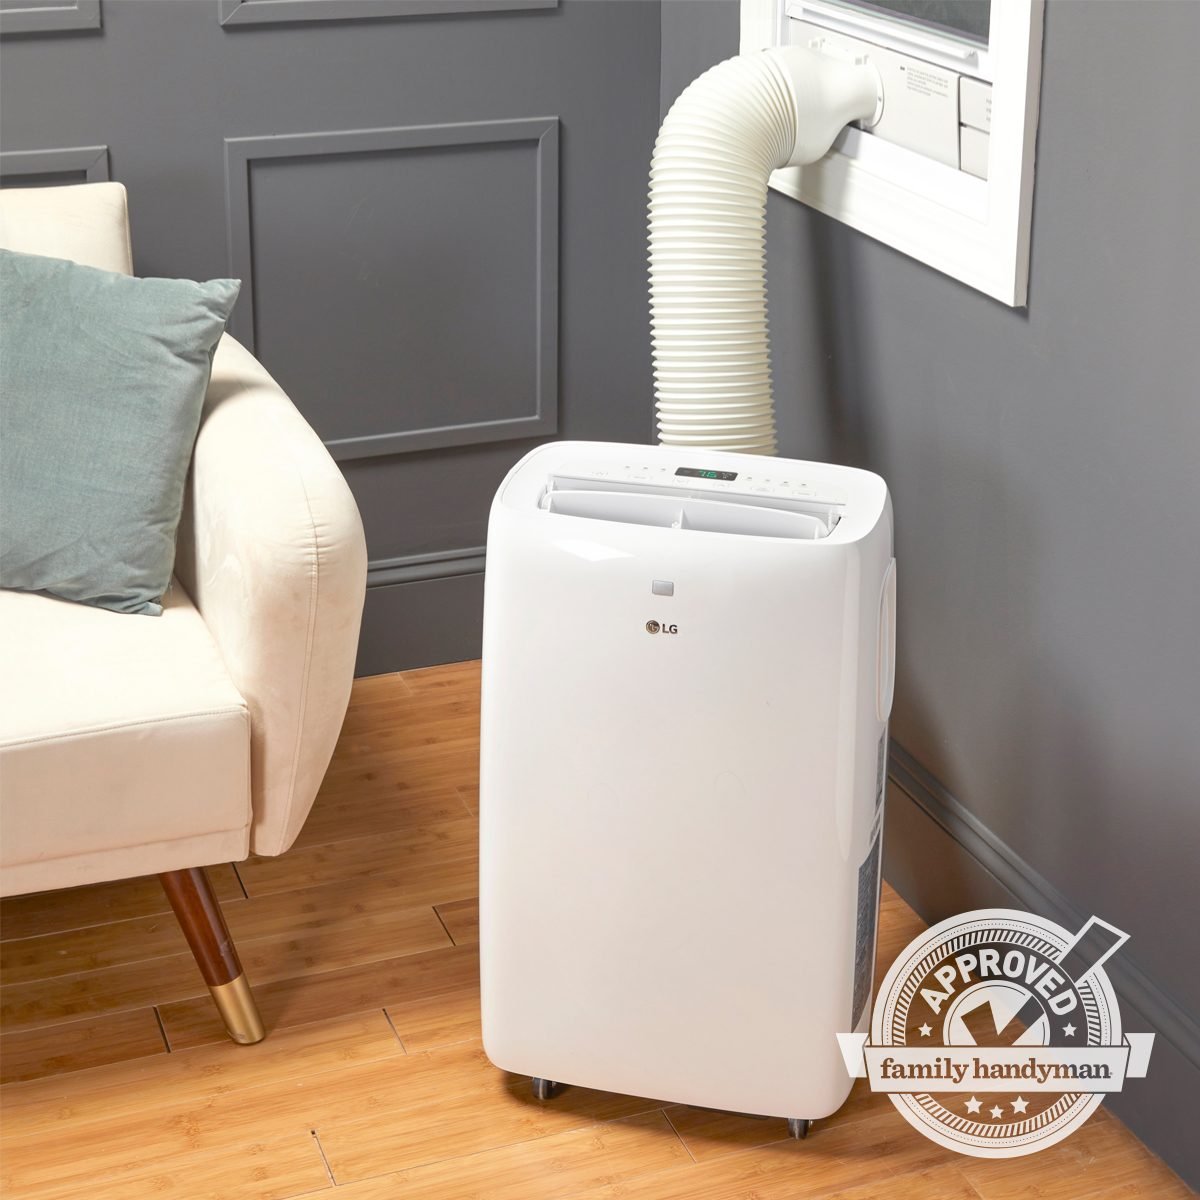 Portable LG Air Conditioner Review: Cool Your Home With This Floor AC Unit